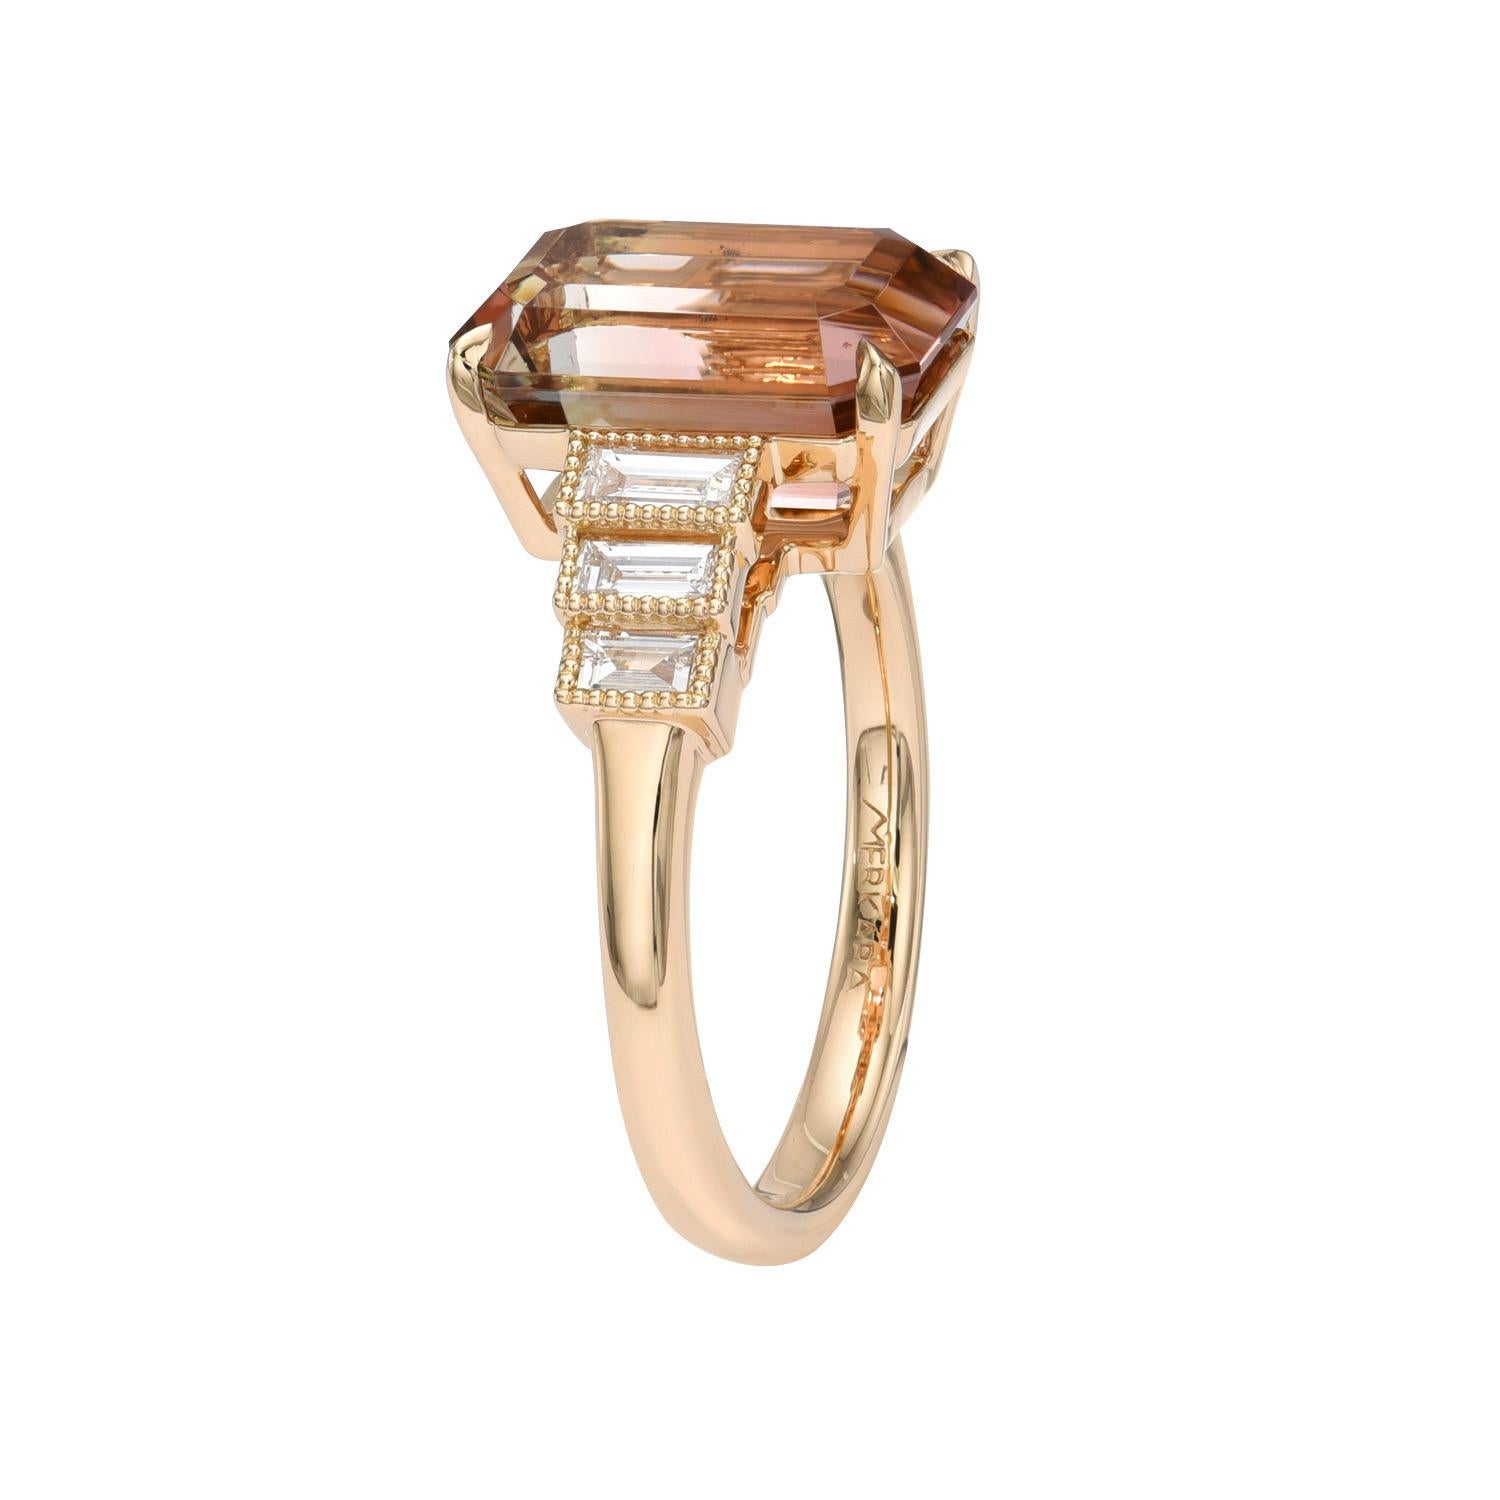 Bicolor Pink Tourmaline Ring 5.07 Carat Emerald Cut Rose Gold In New Condition For Sale In Beverly Hills, CA